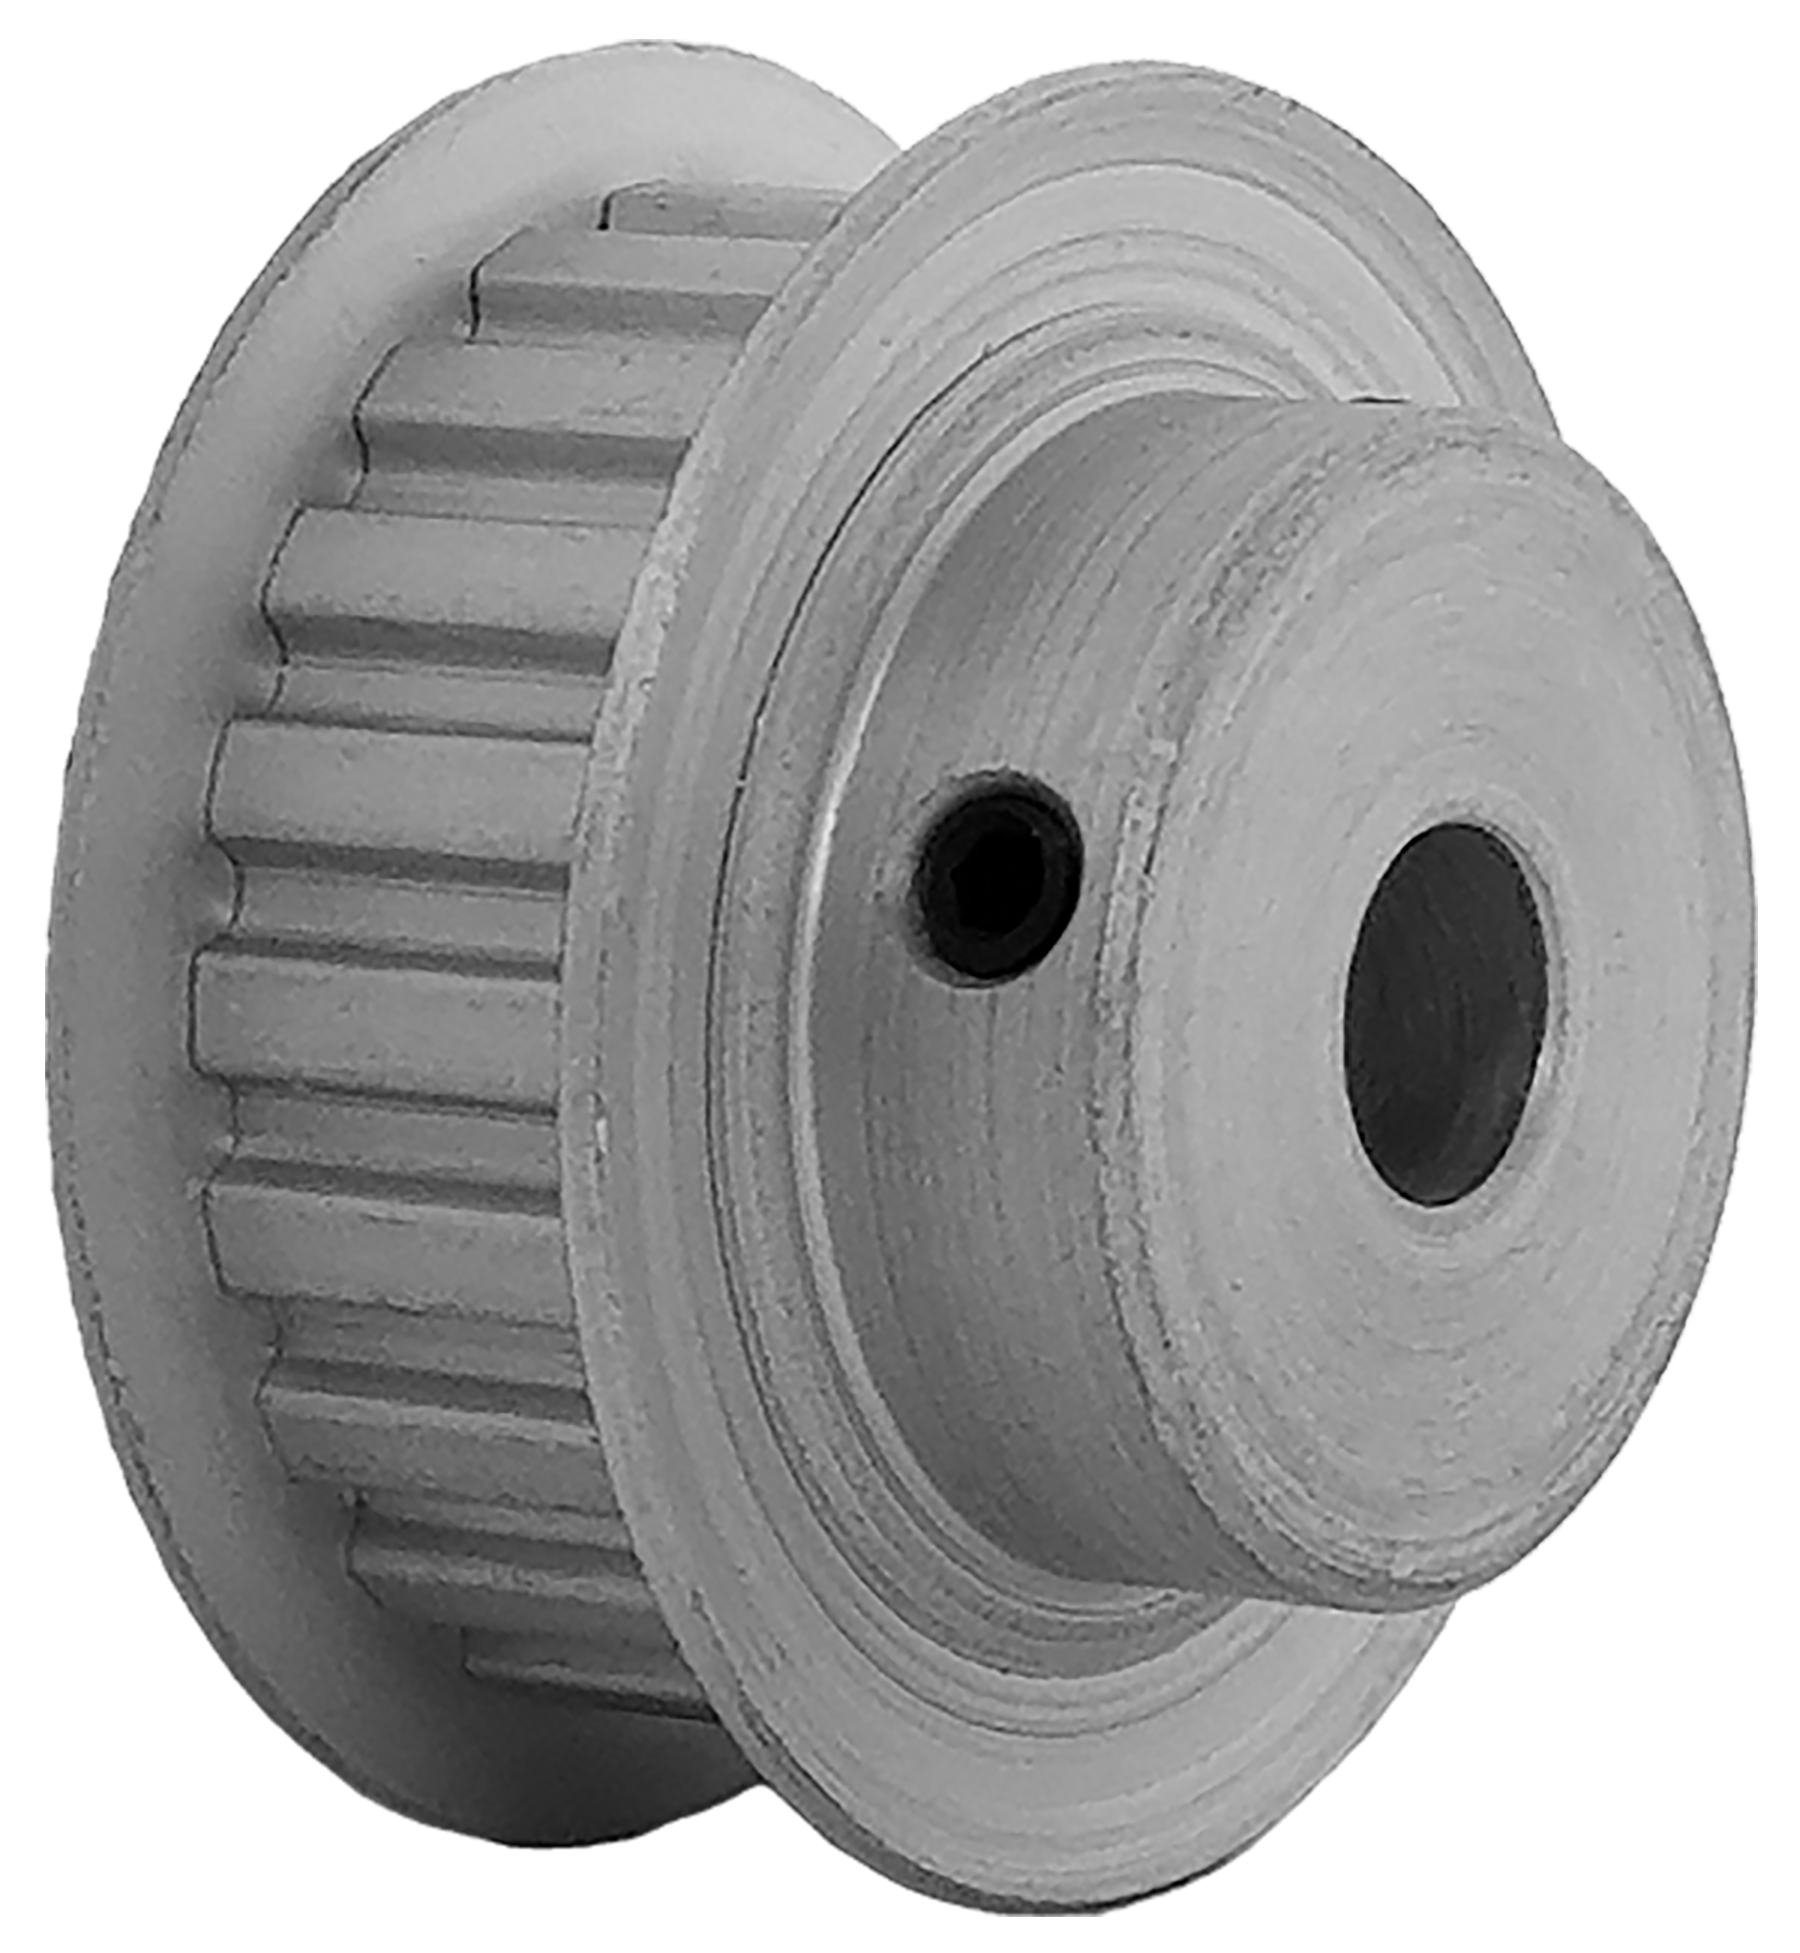 21XL037-6FA4 - Aluminum Imperial Pitch Pulleys